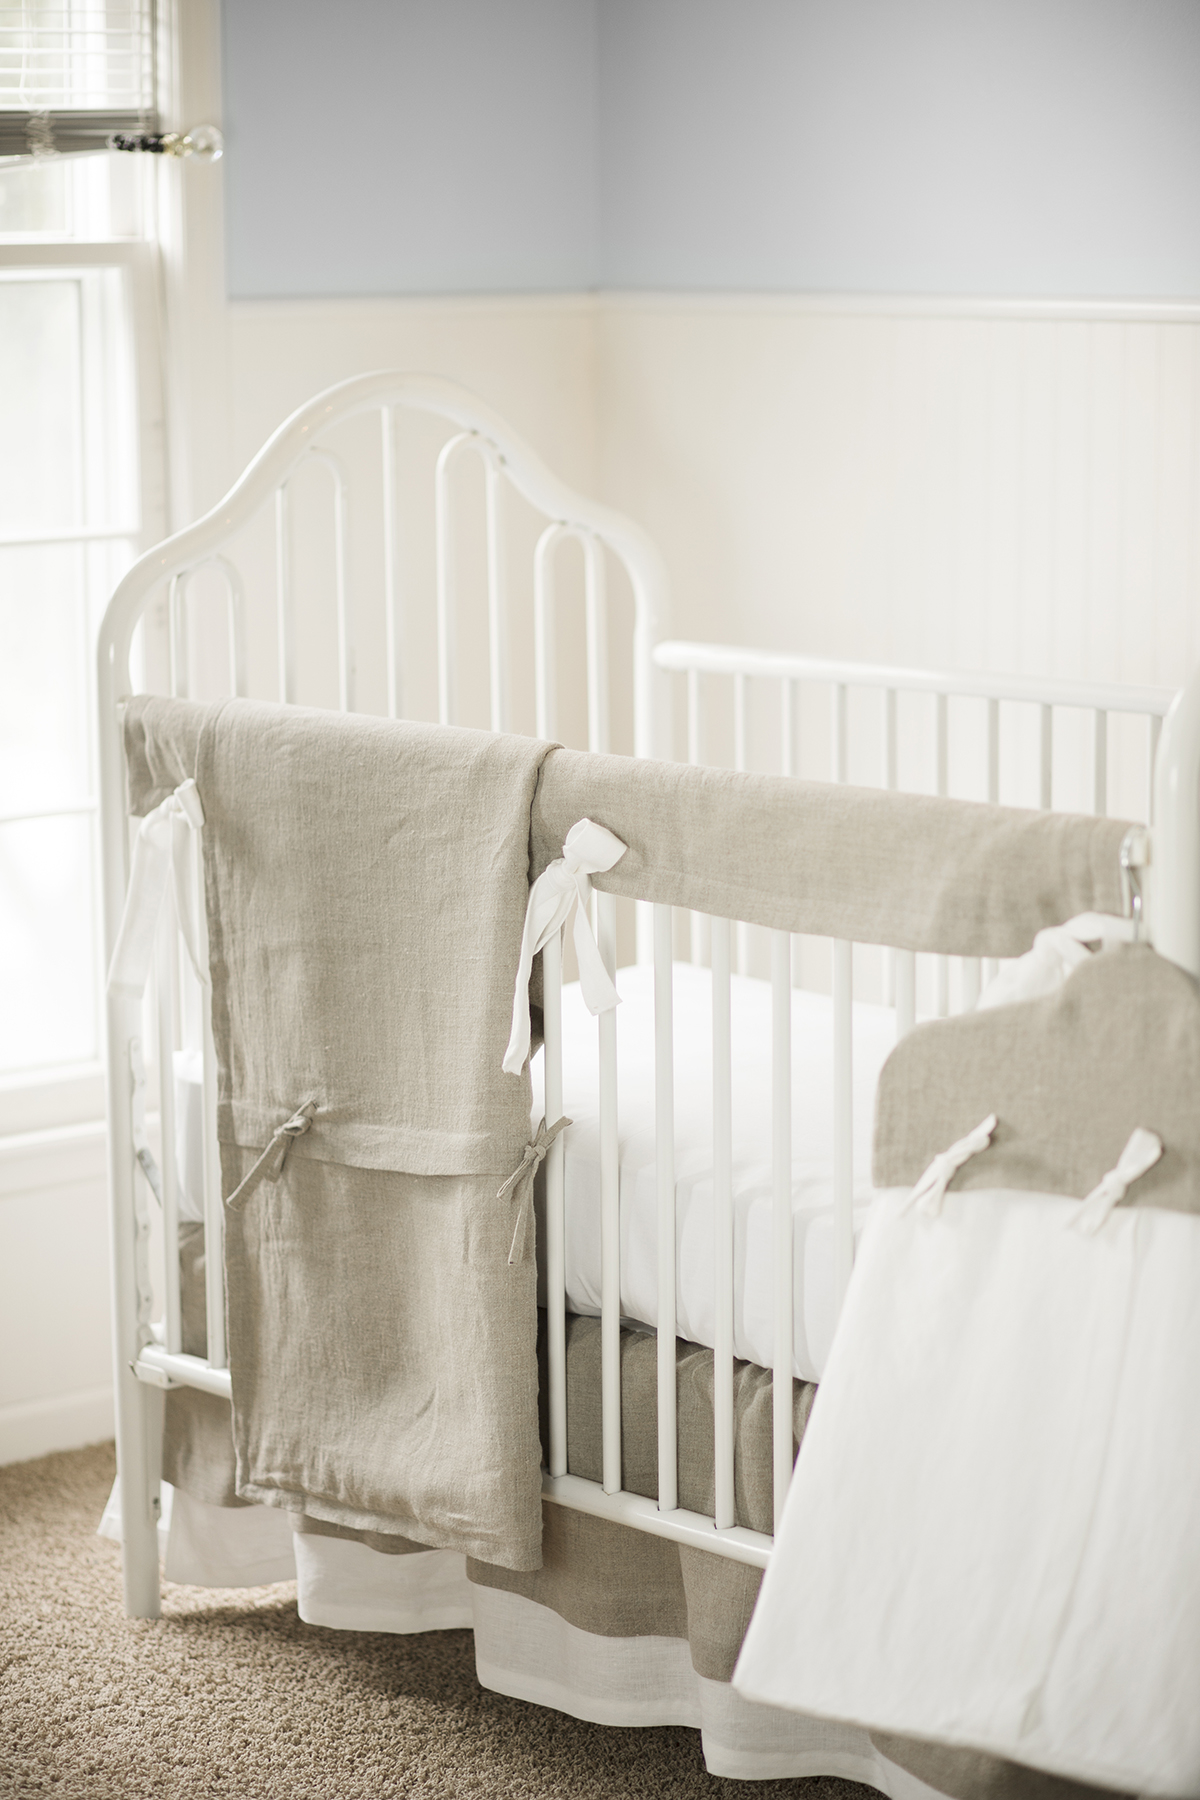 Jenni, Gender neutral baby bedding with modern farmhouse flair.
IL020 in natural and white.